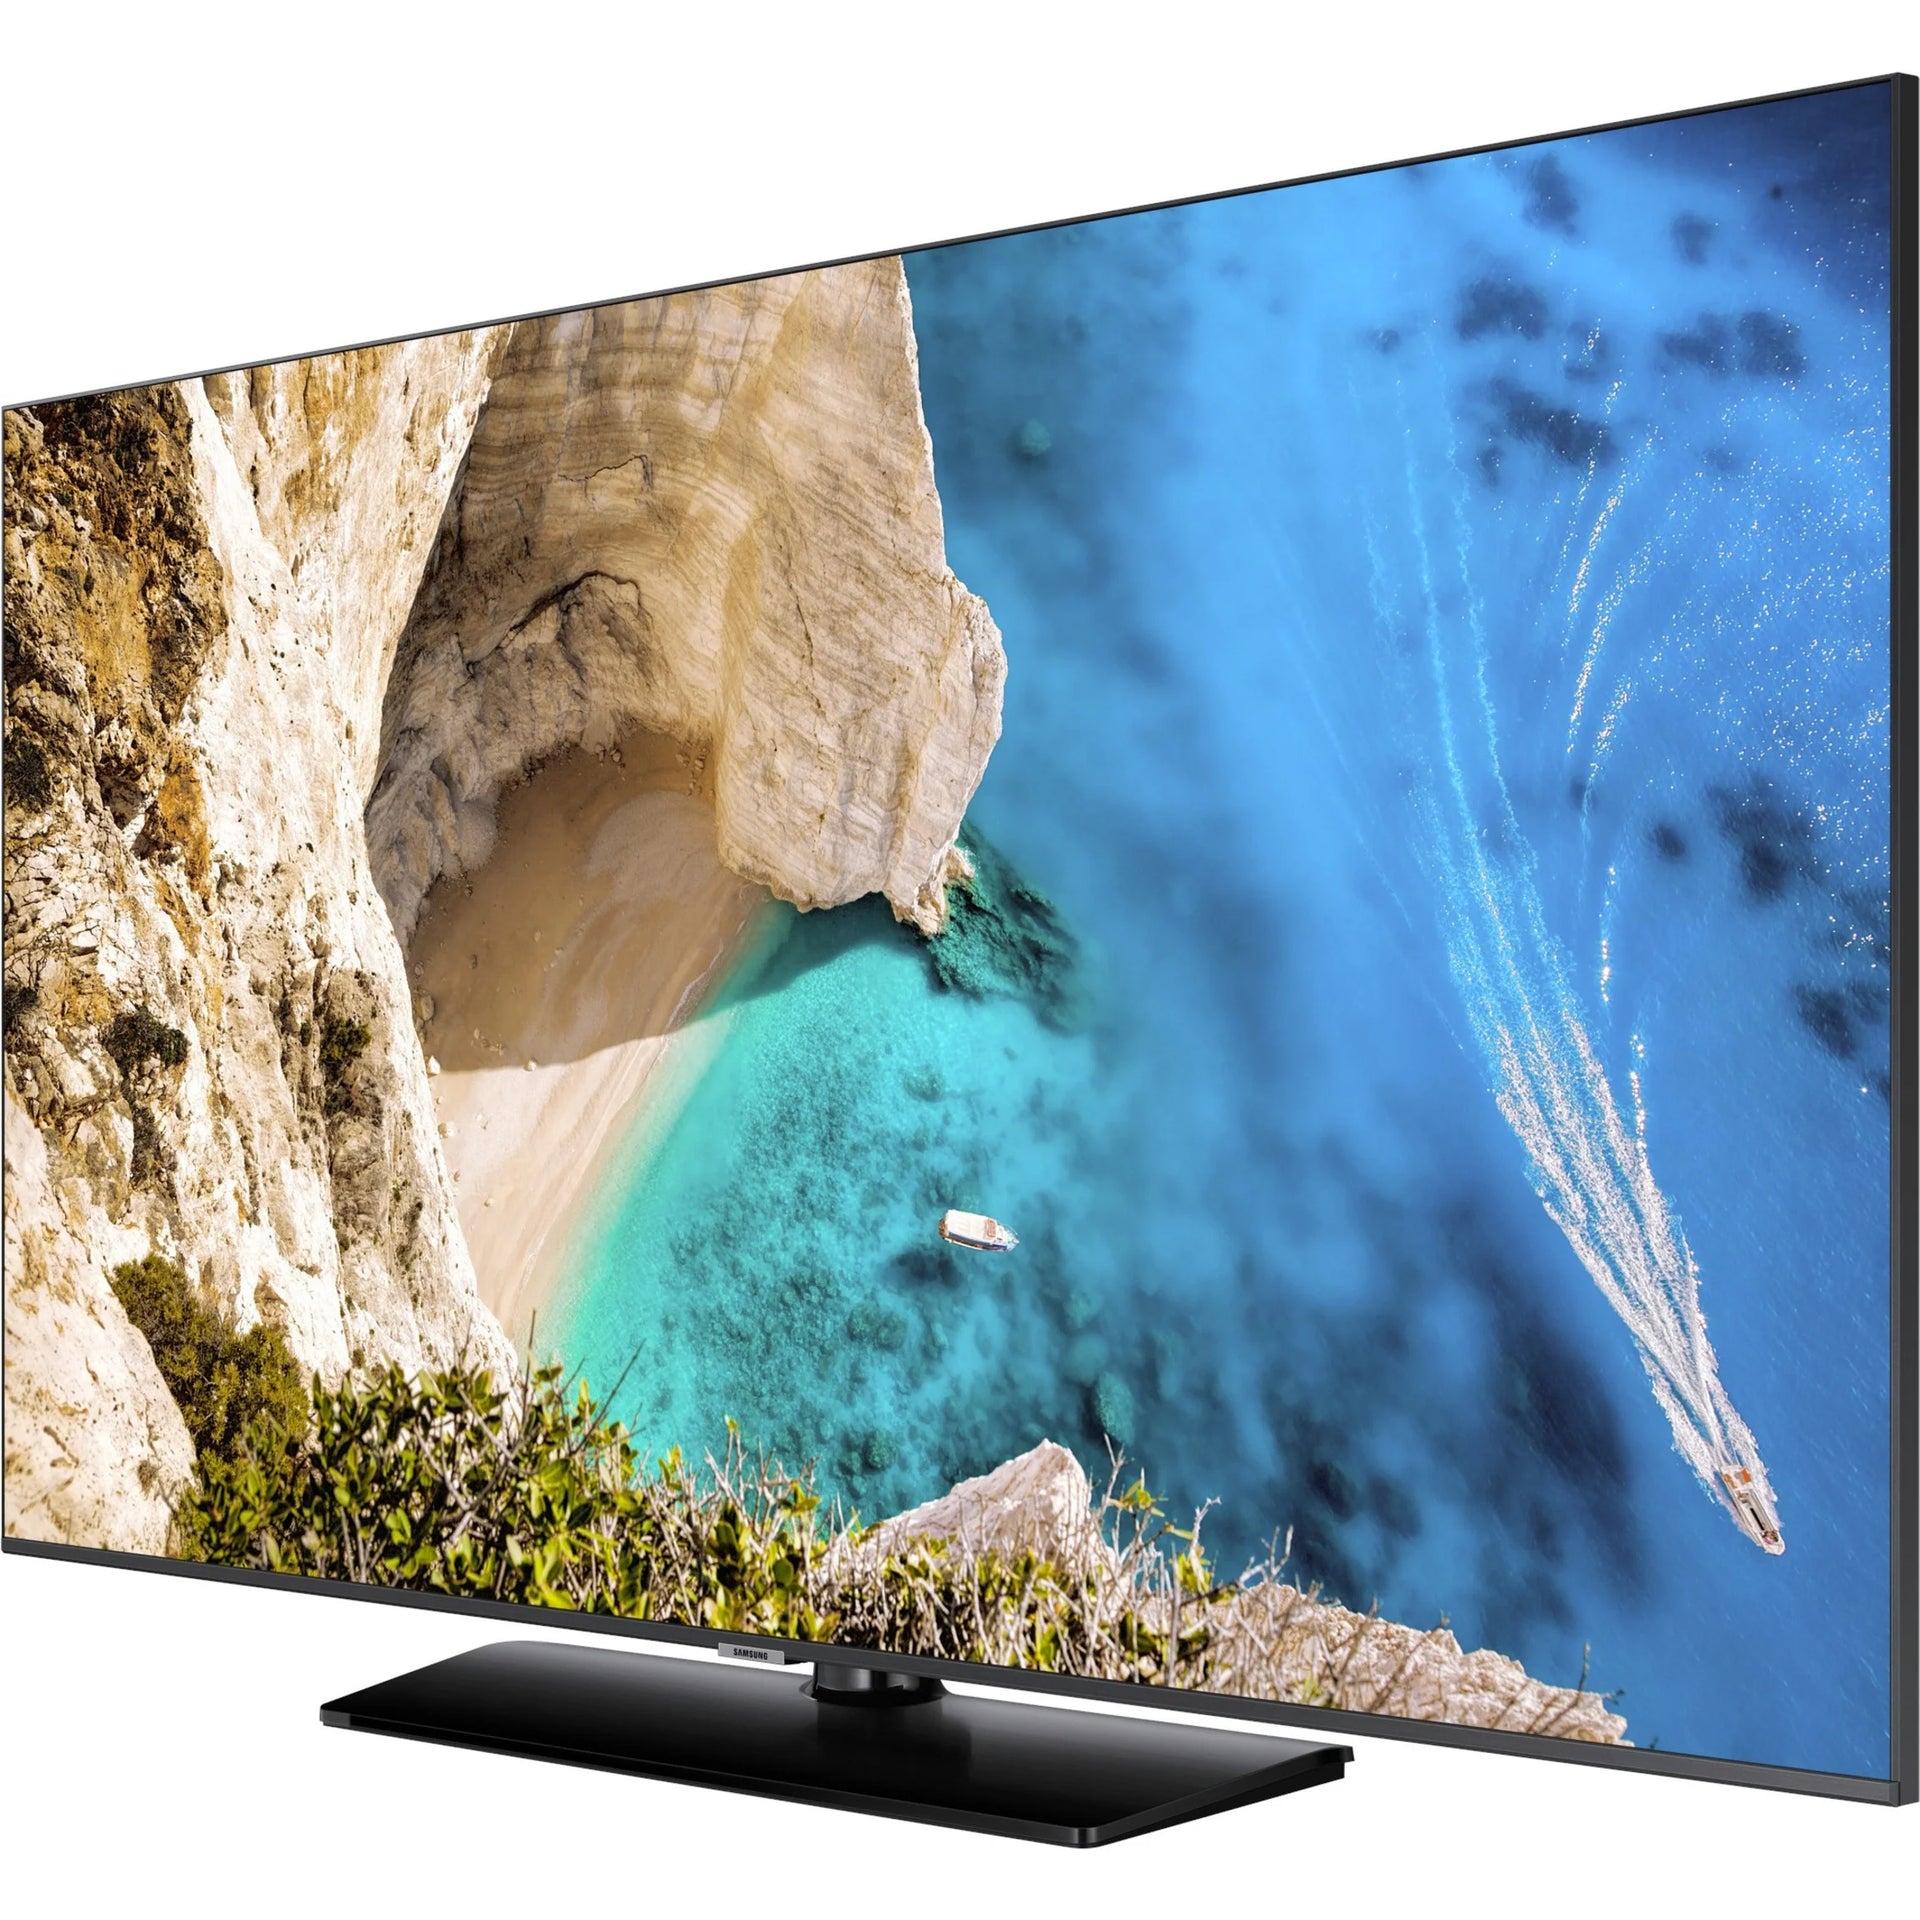 What's the Difference Between LED and LCD TVs?